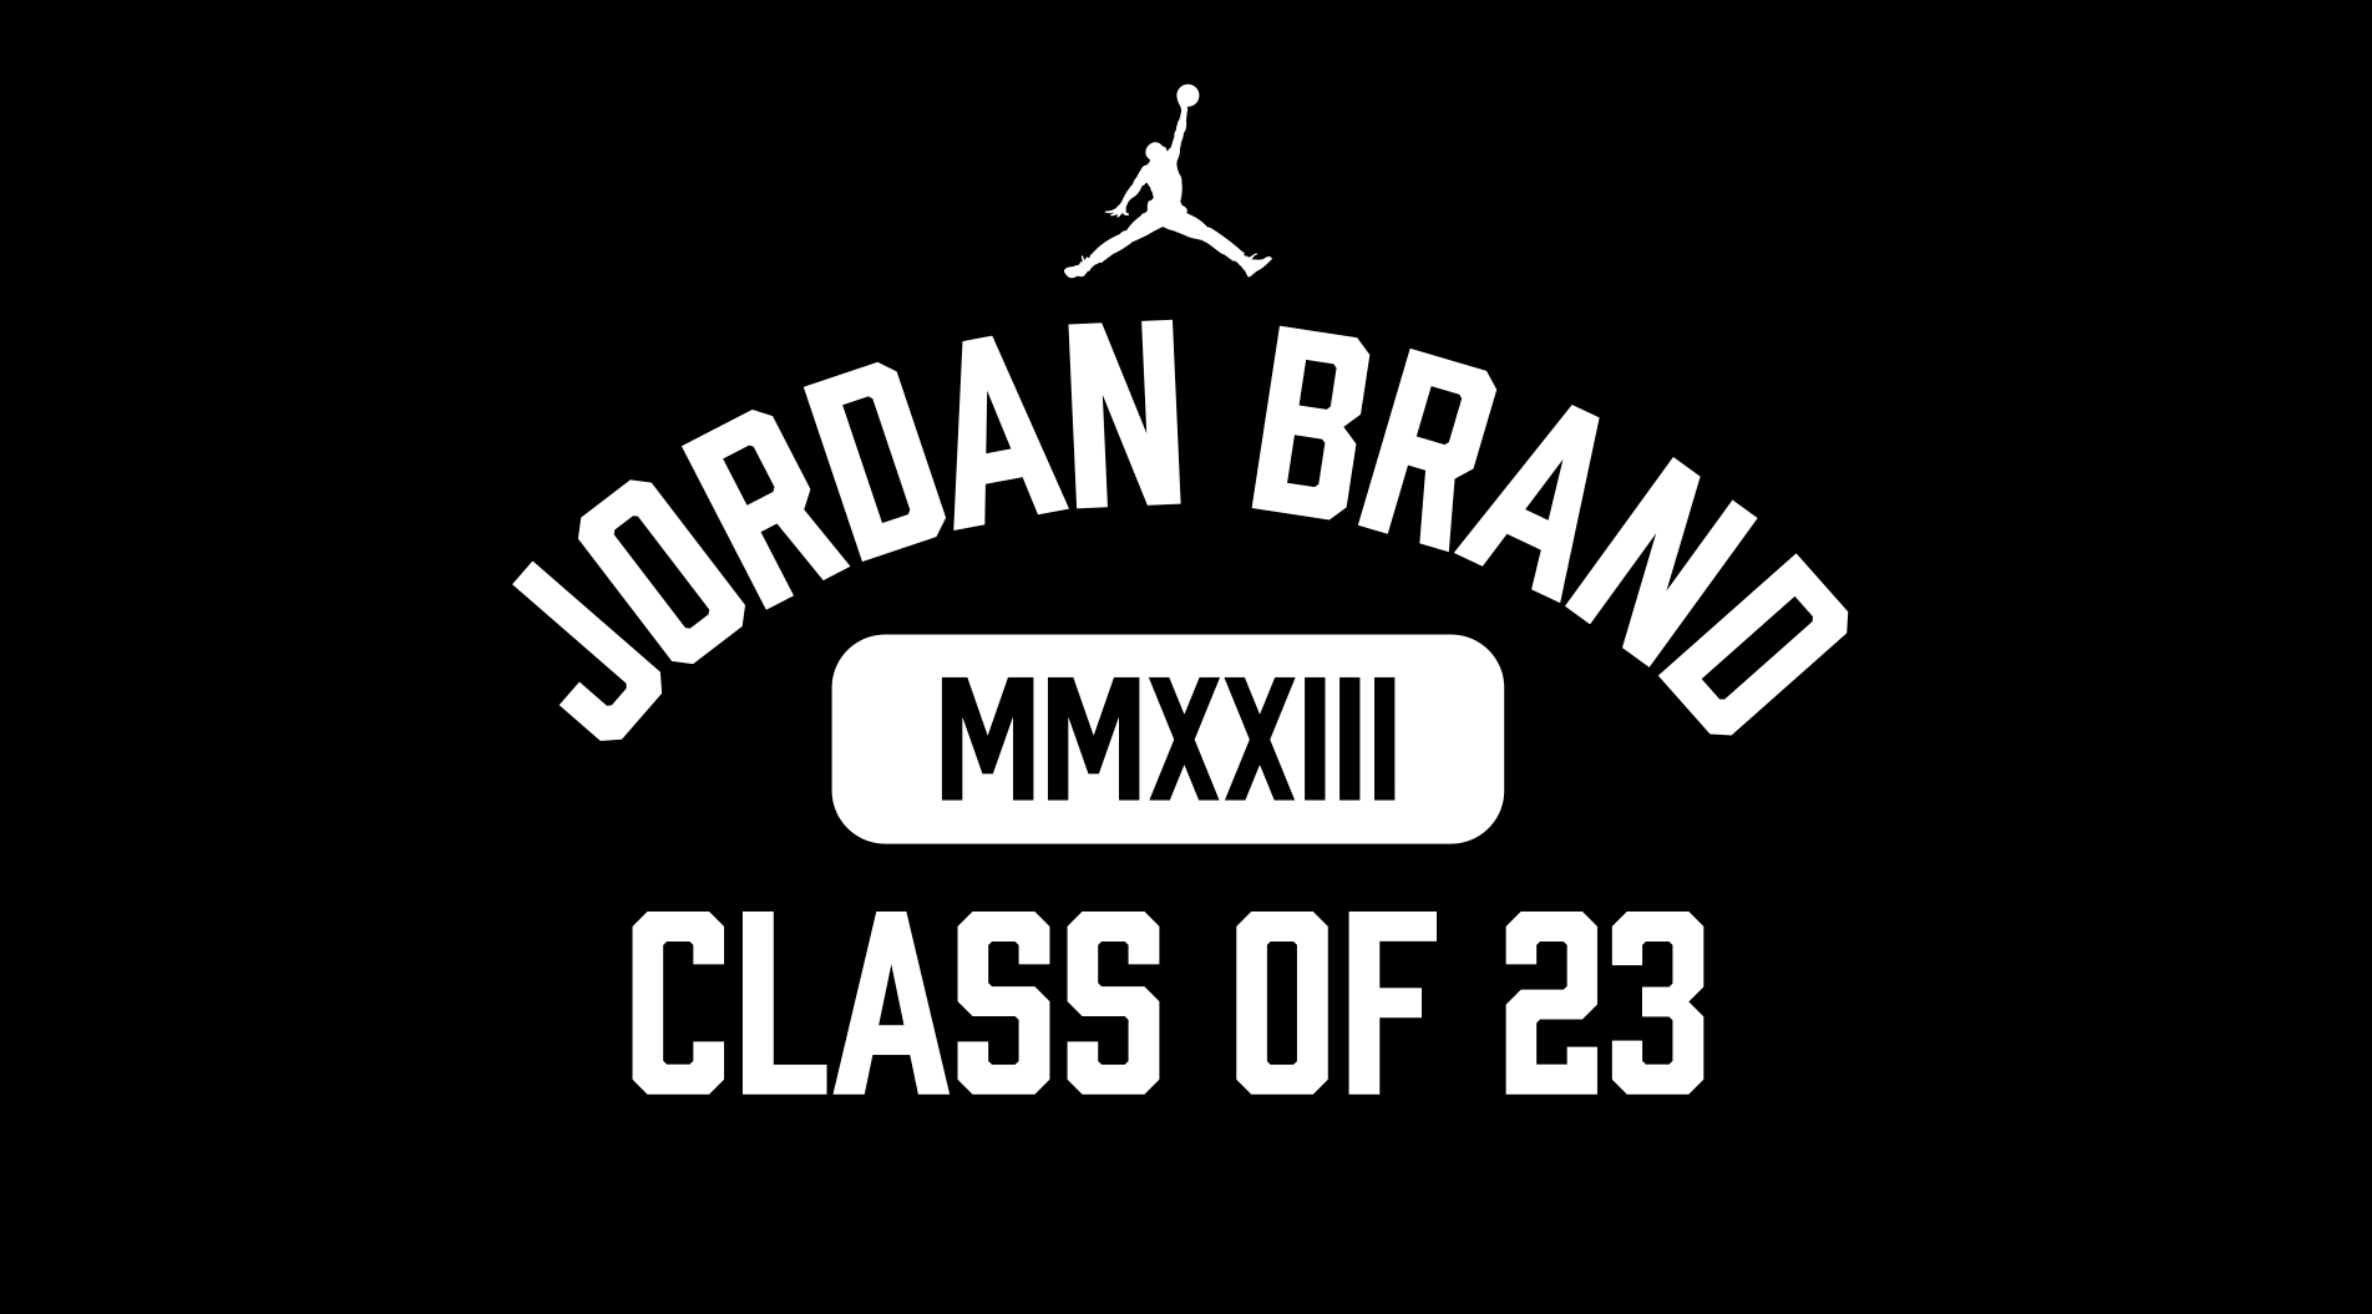 Jordan Brand Classic 2018: Rosters, TV Schedule, Live Stream and